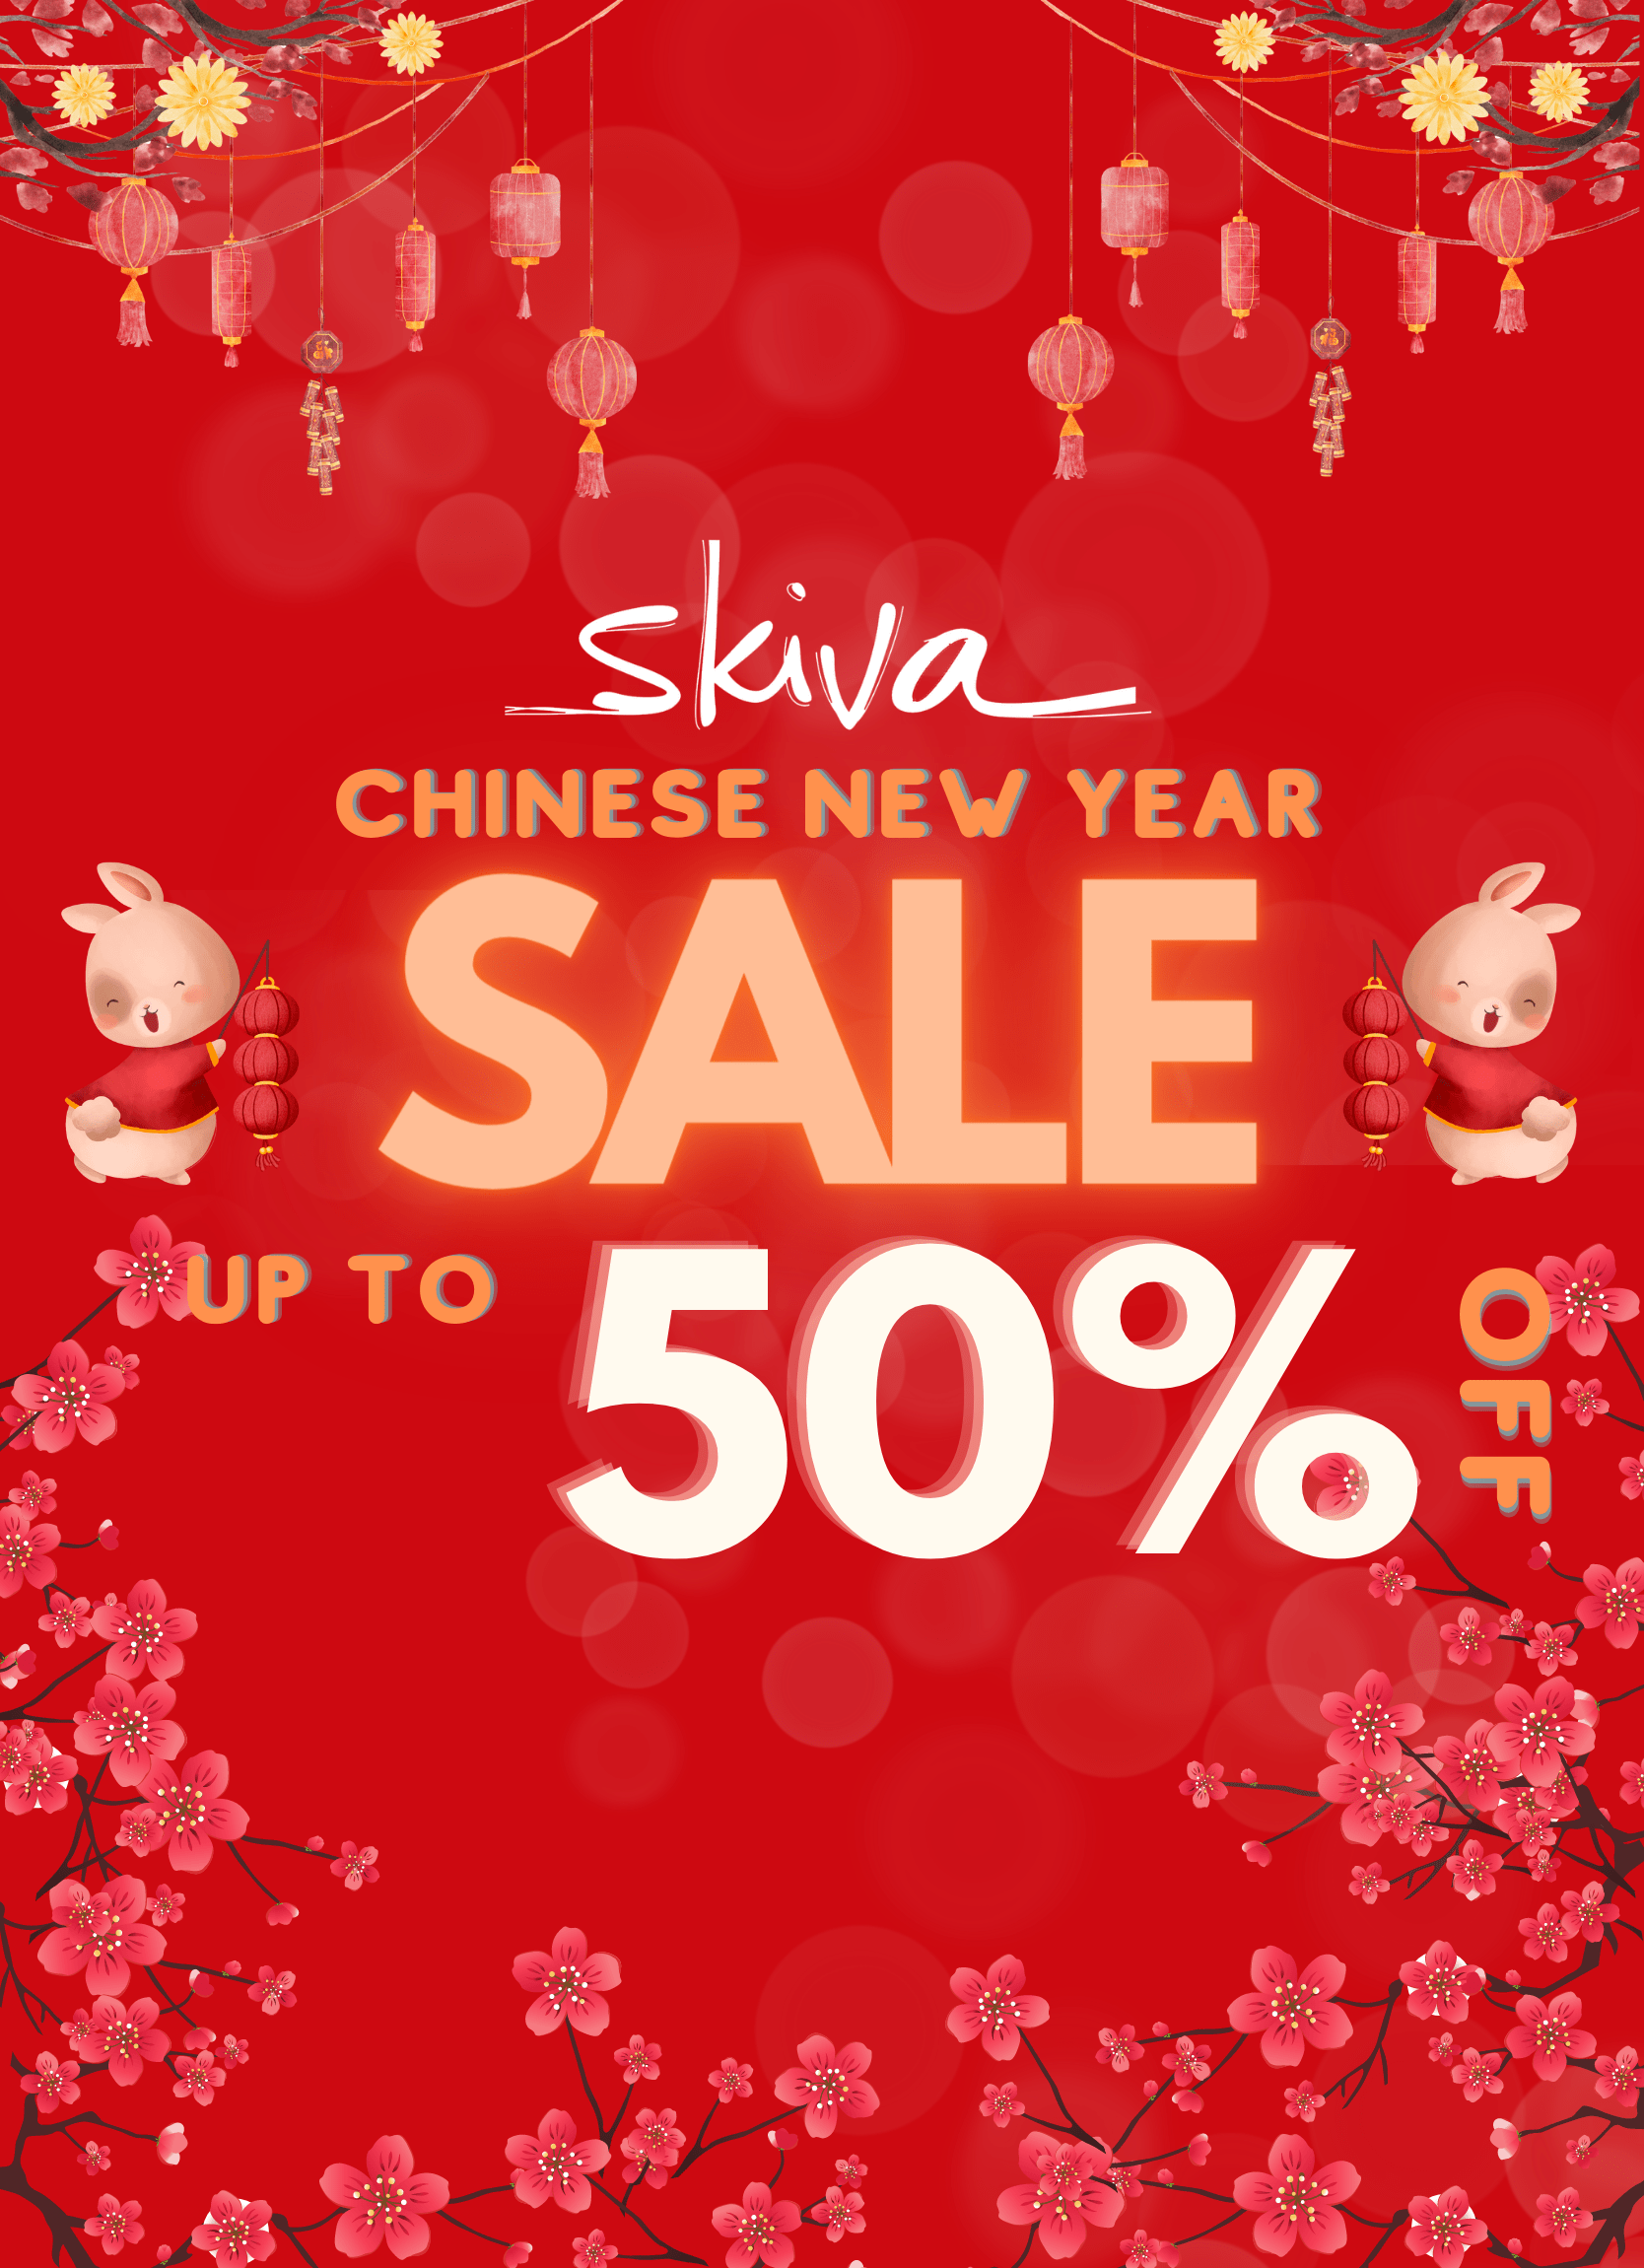 Chinese New Year Sale Up To 50% off